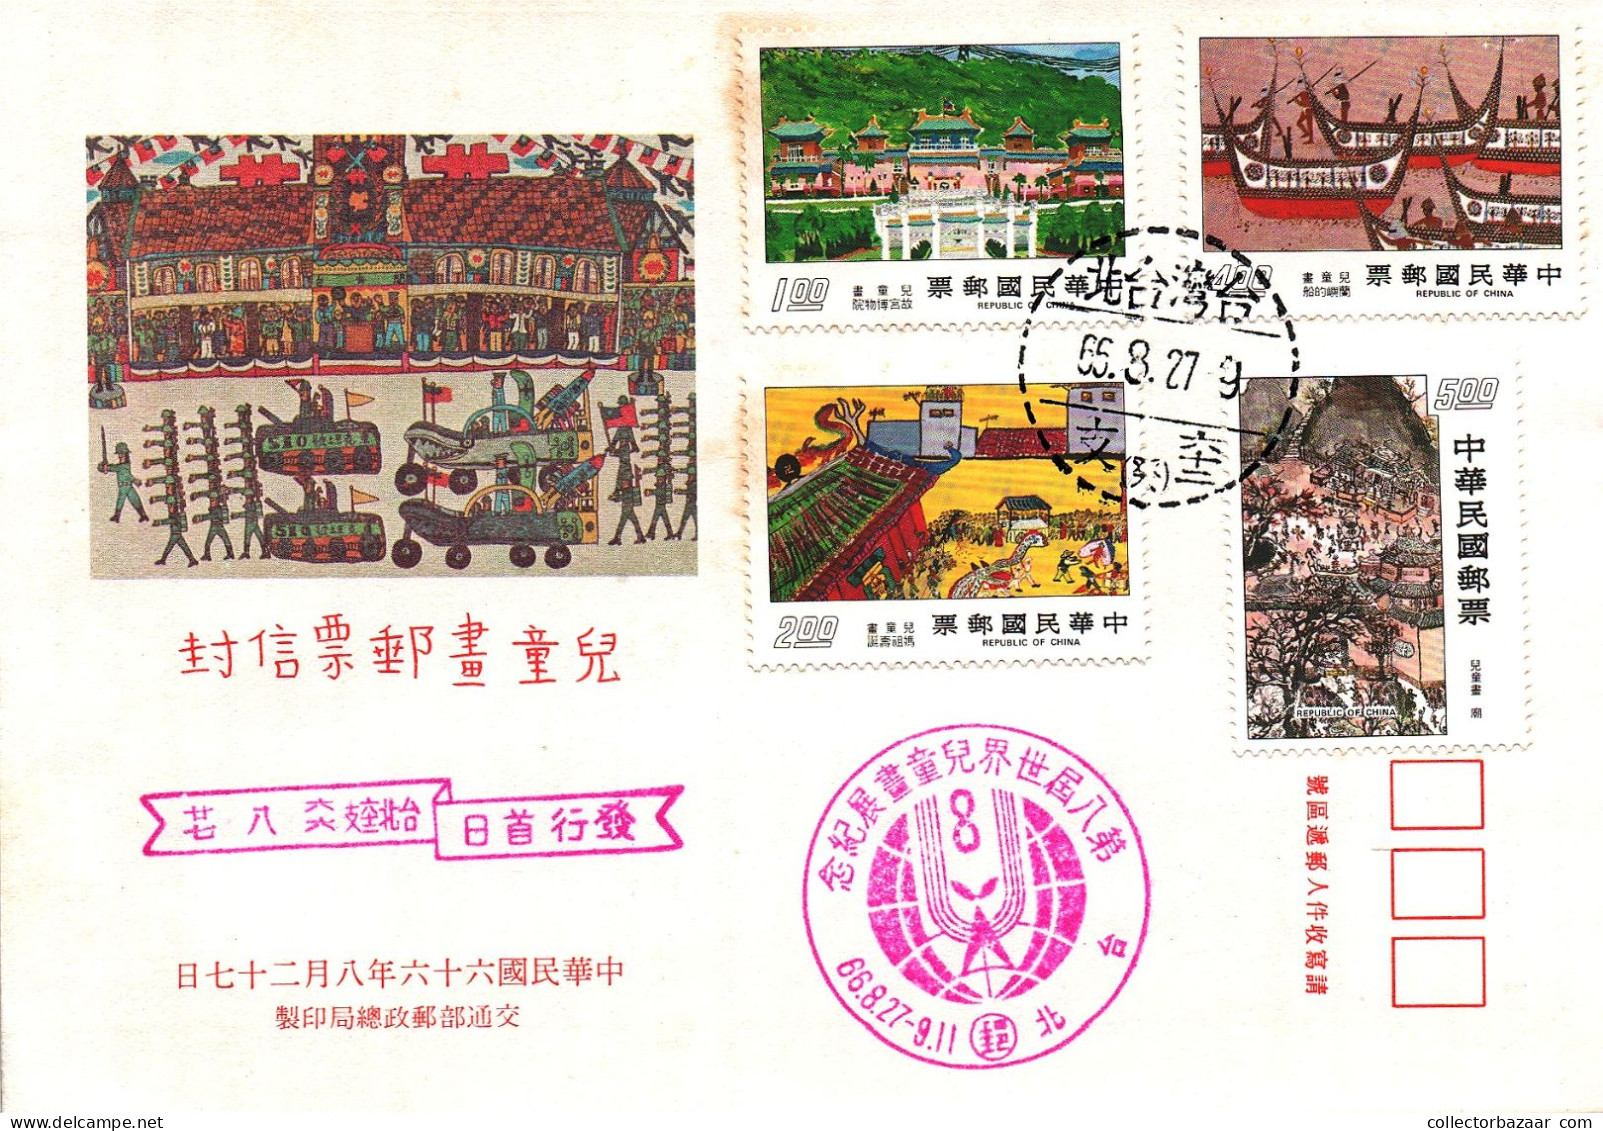 Taiwan Formosa Republic Of China FDC Paintings About Buildings, Boats Traditional Town - 5$,4$,2$ And 1$ Stamps - FDC